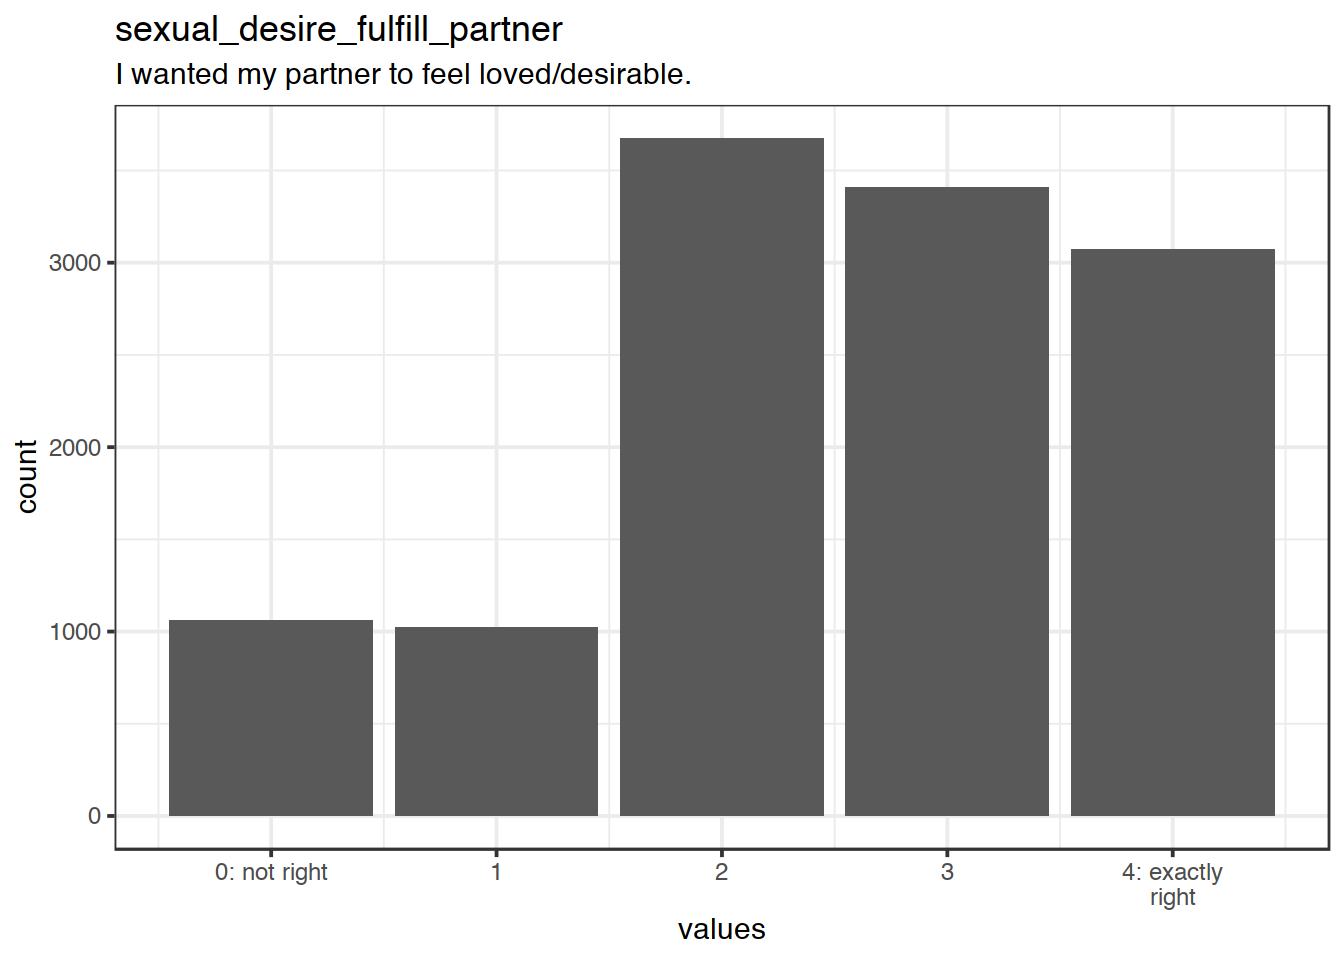 Distribution of values for sexual_desire_fulfill_partner